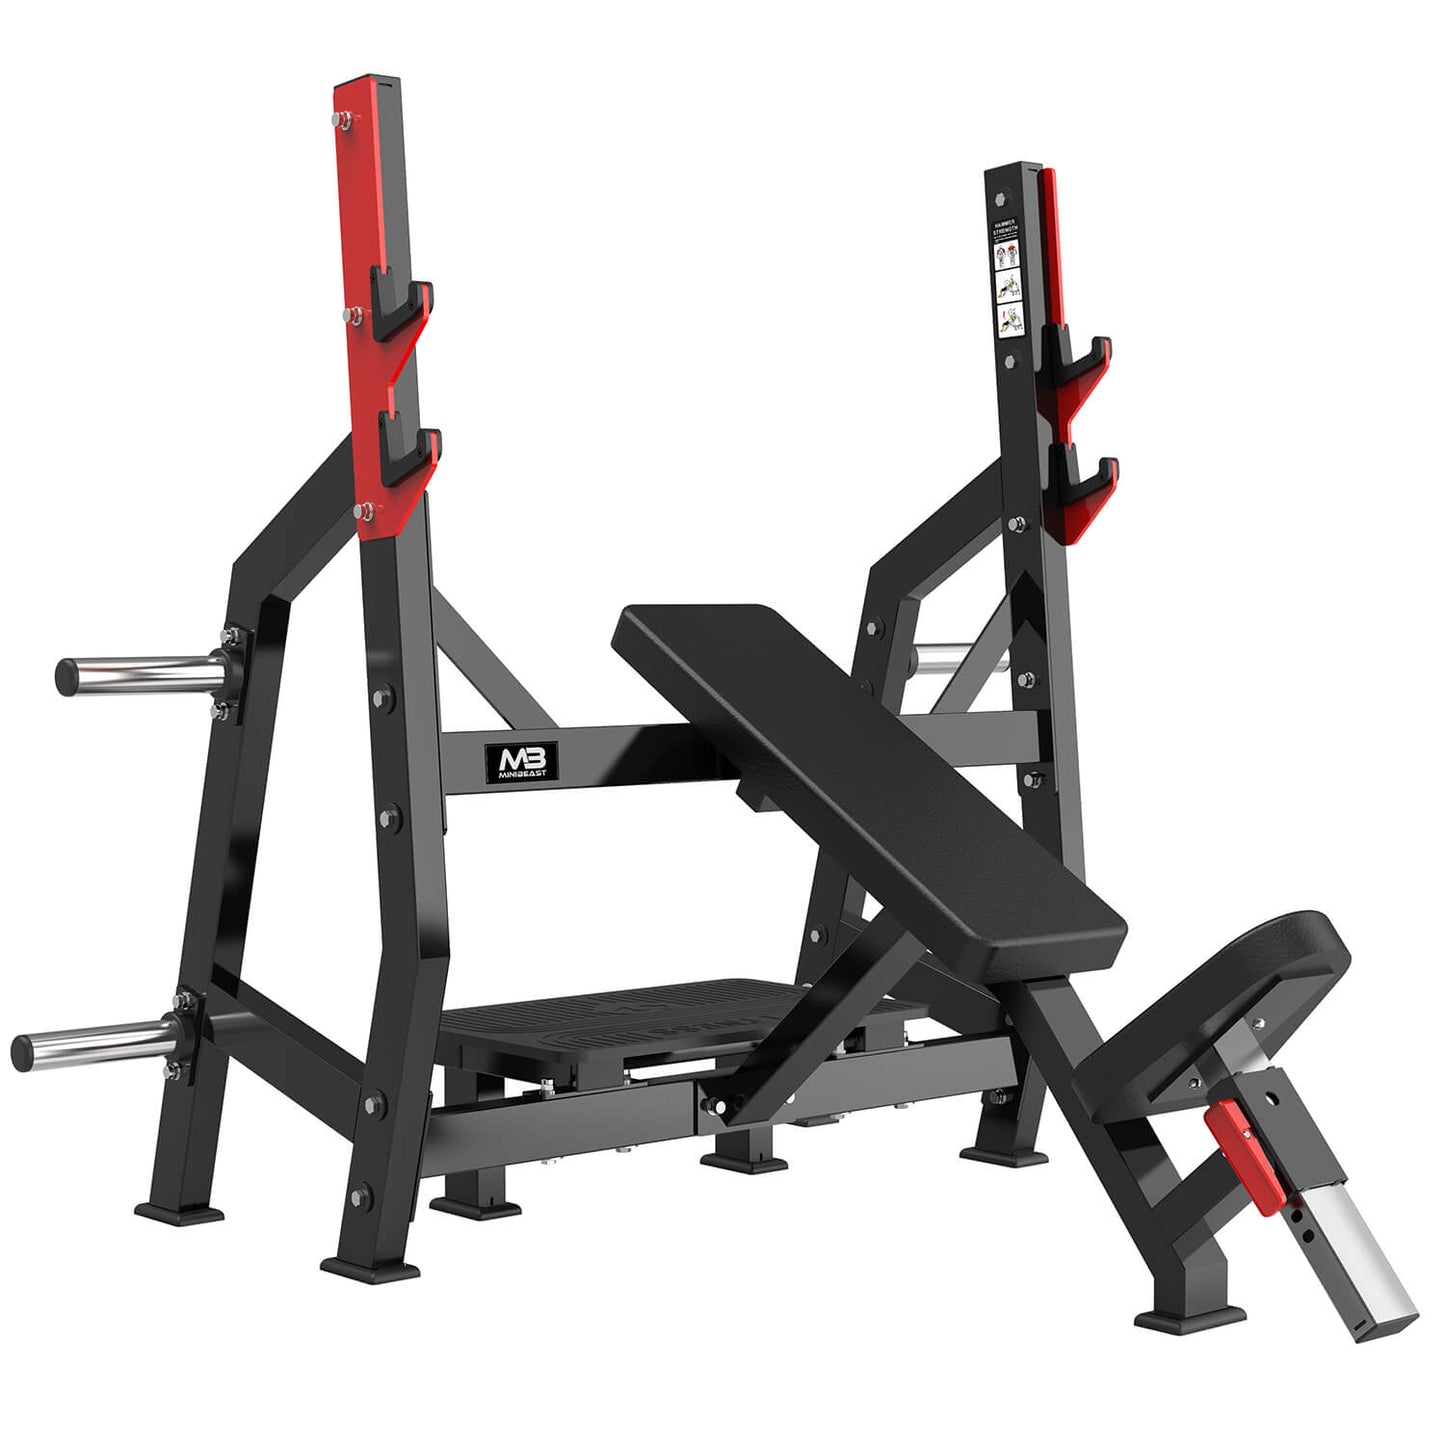 MBTM - Incline Olympic bench